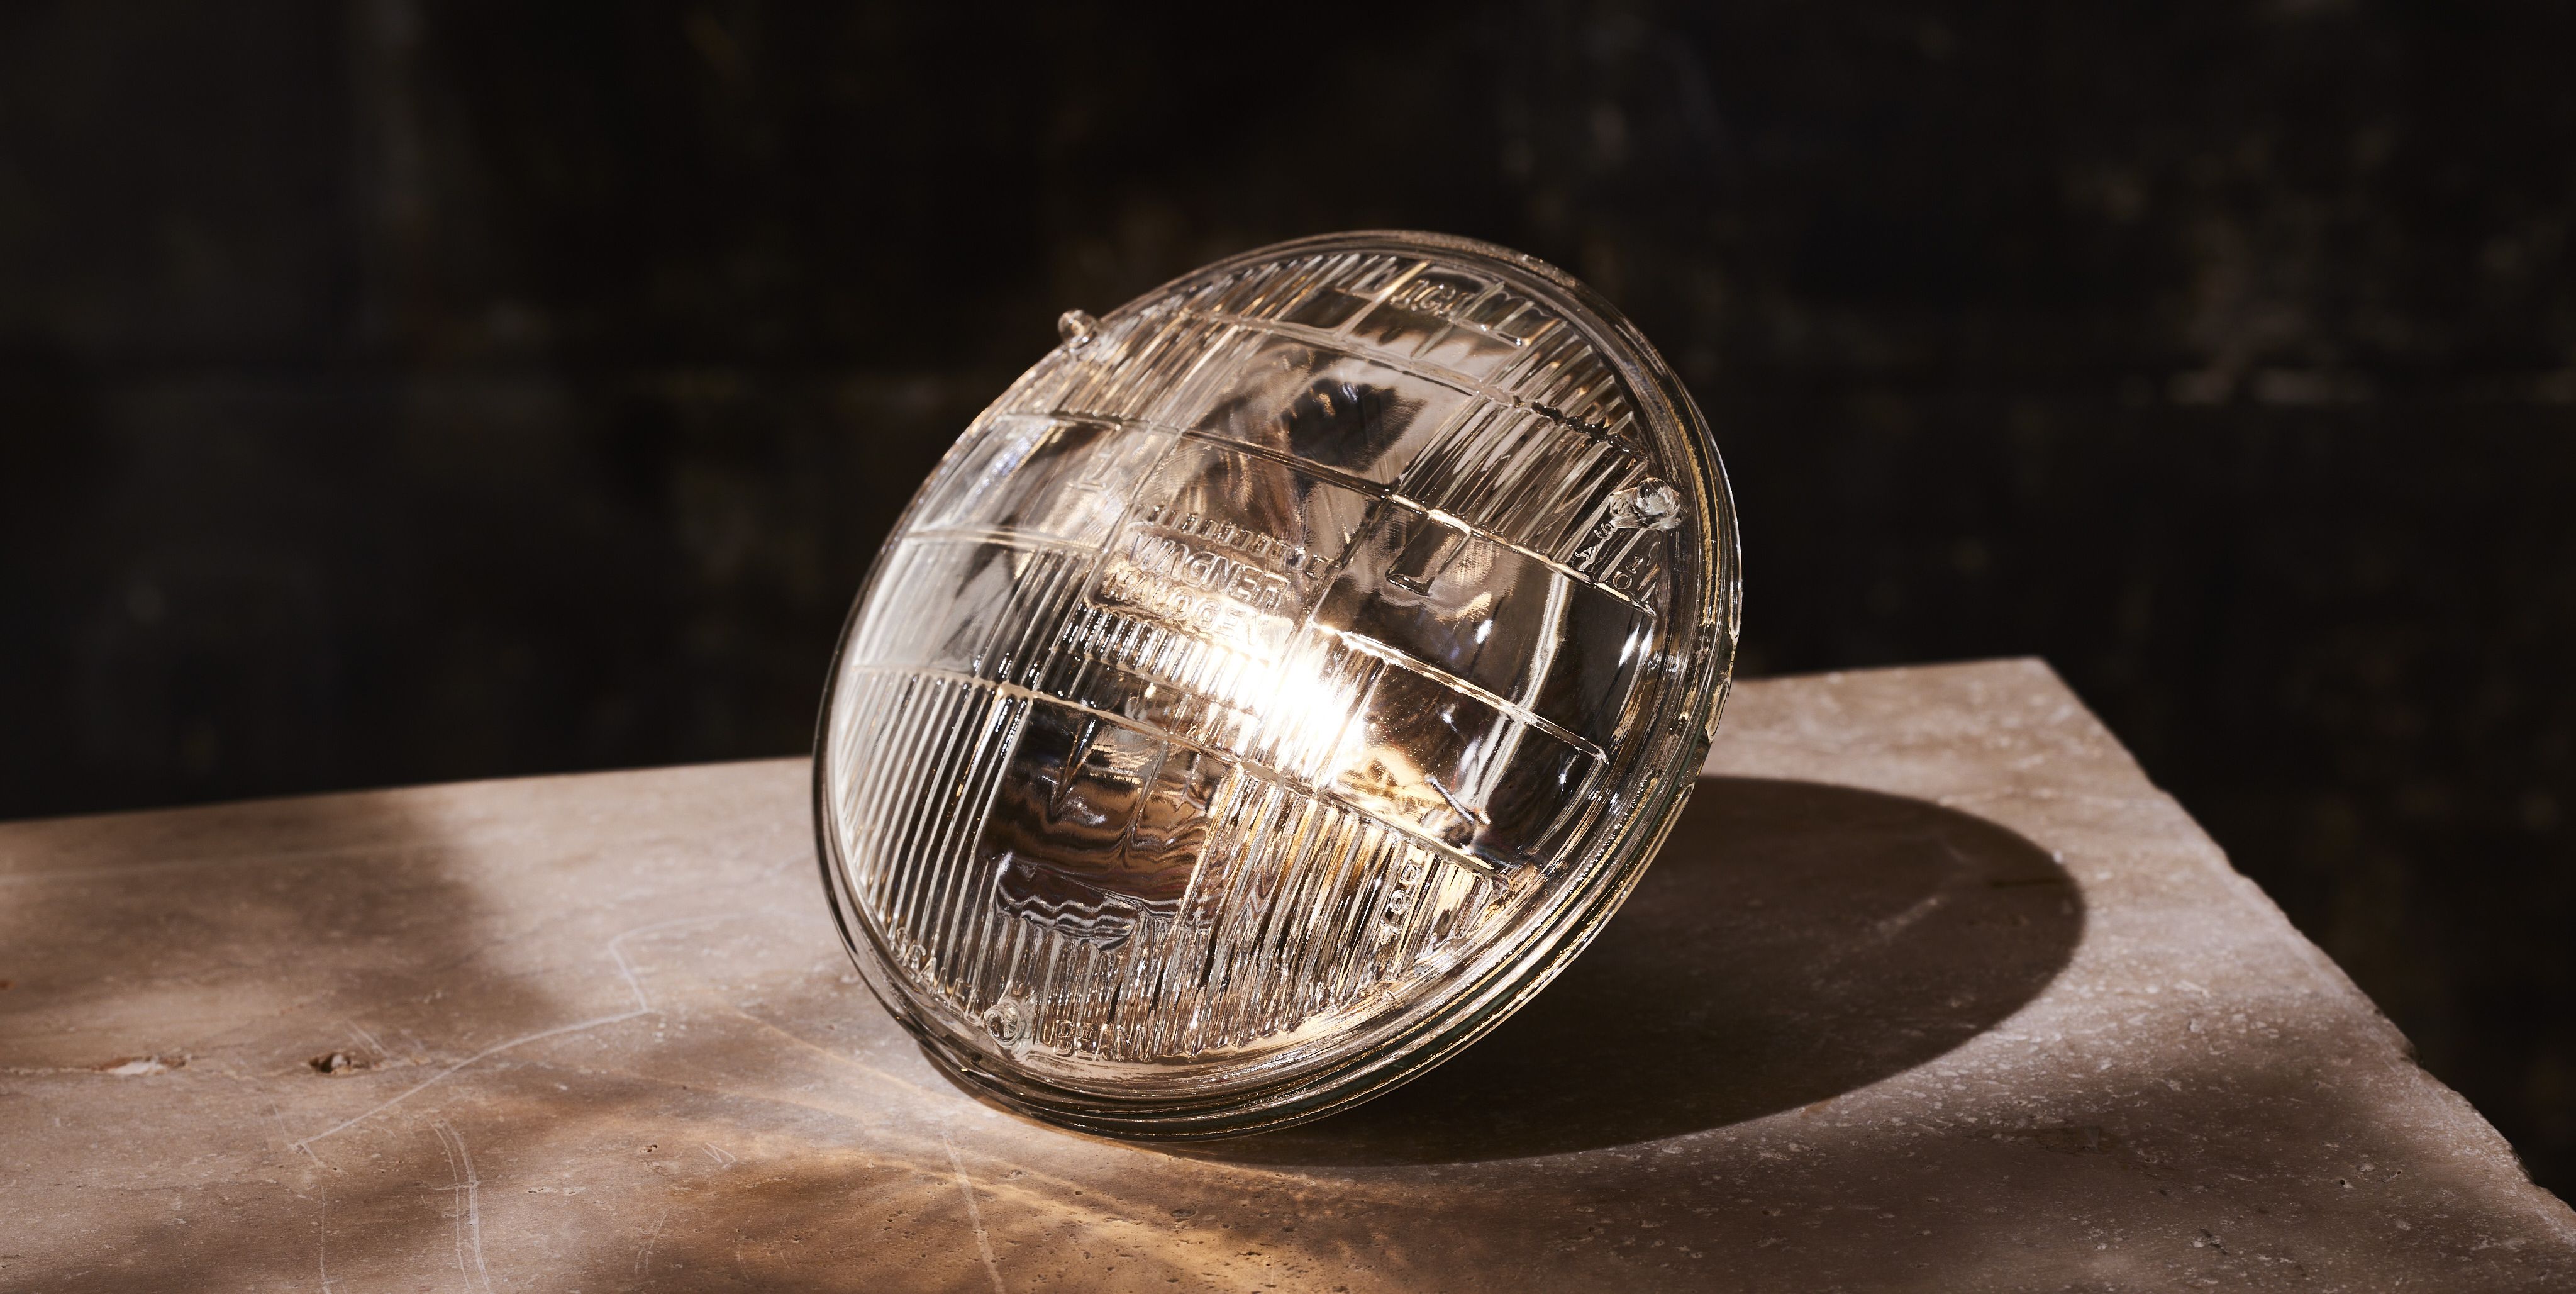 How the Generic Sealed-Beam Headlight Inspired Decades of Iconic Design